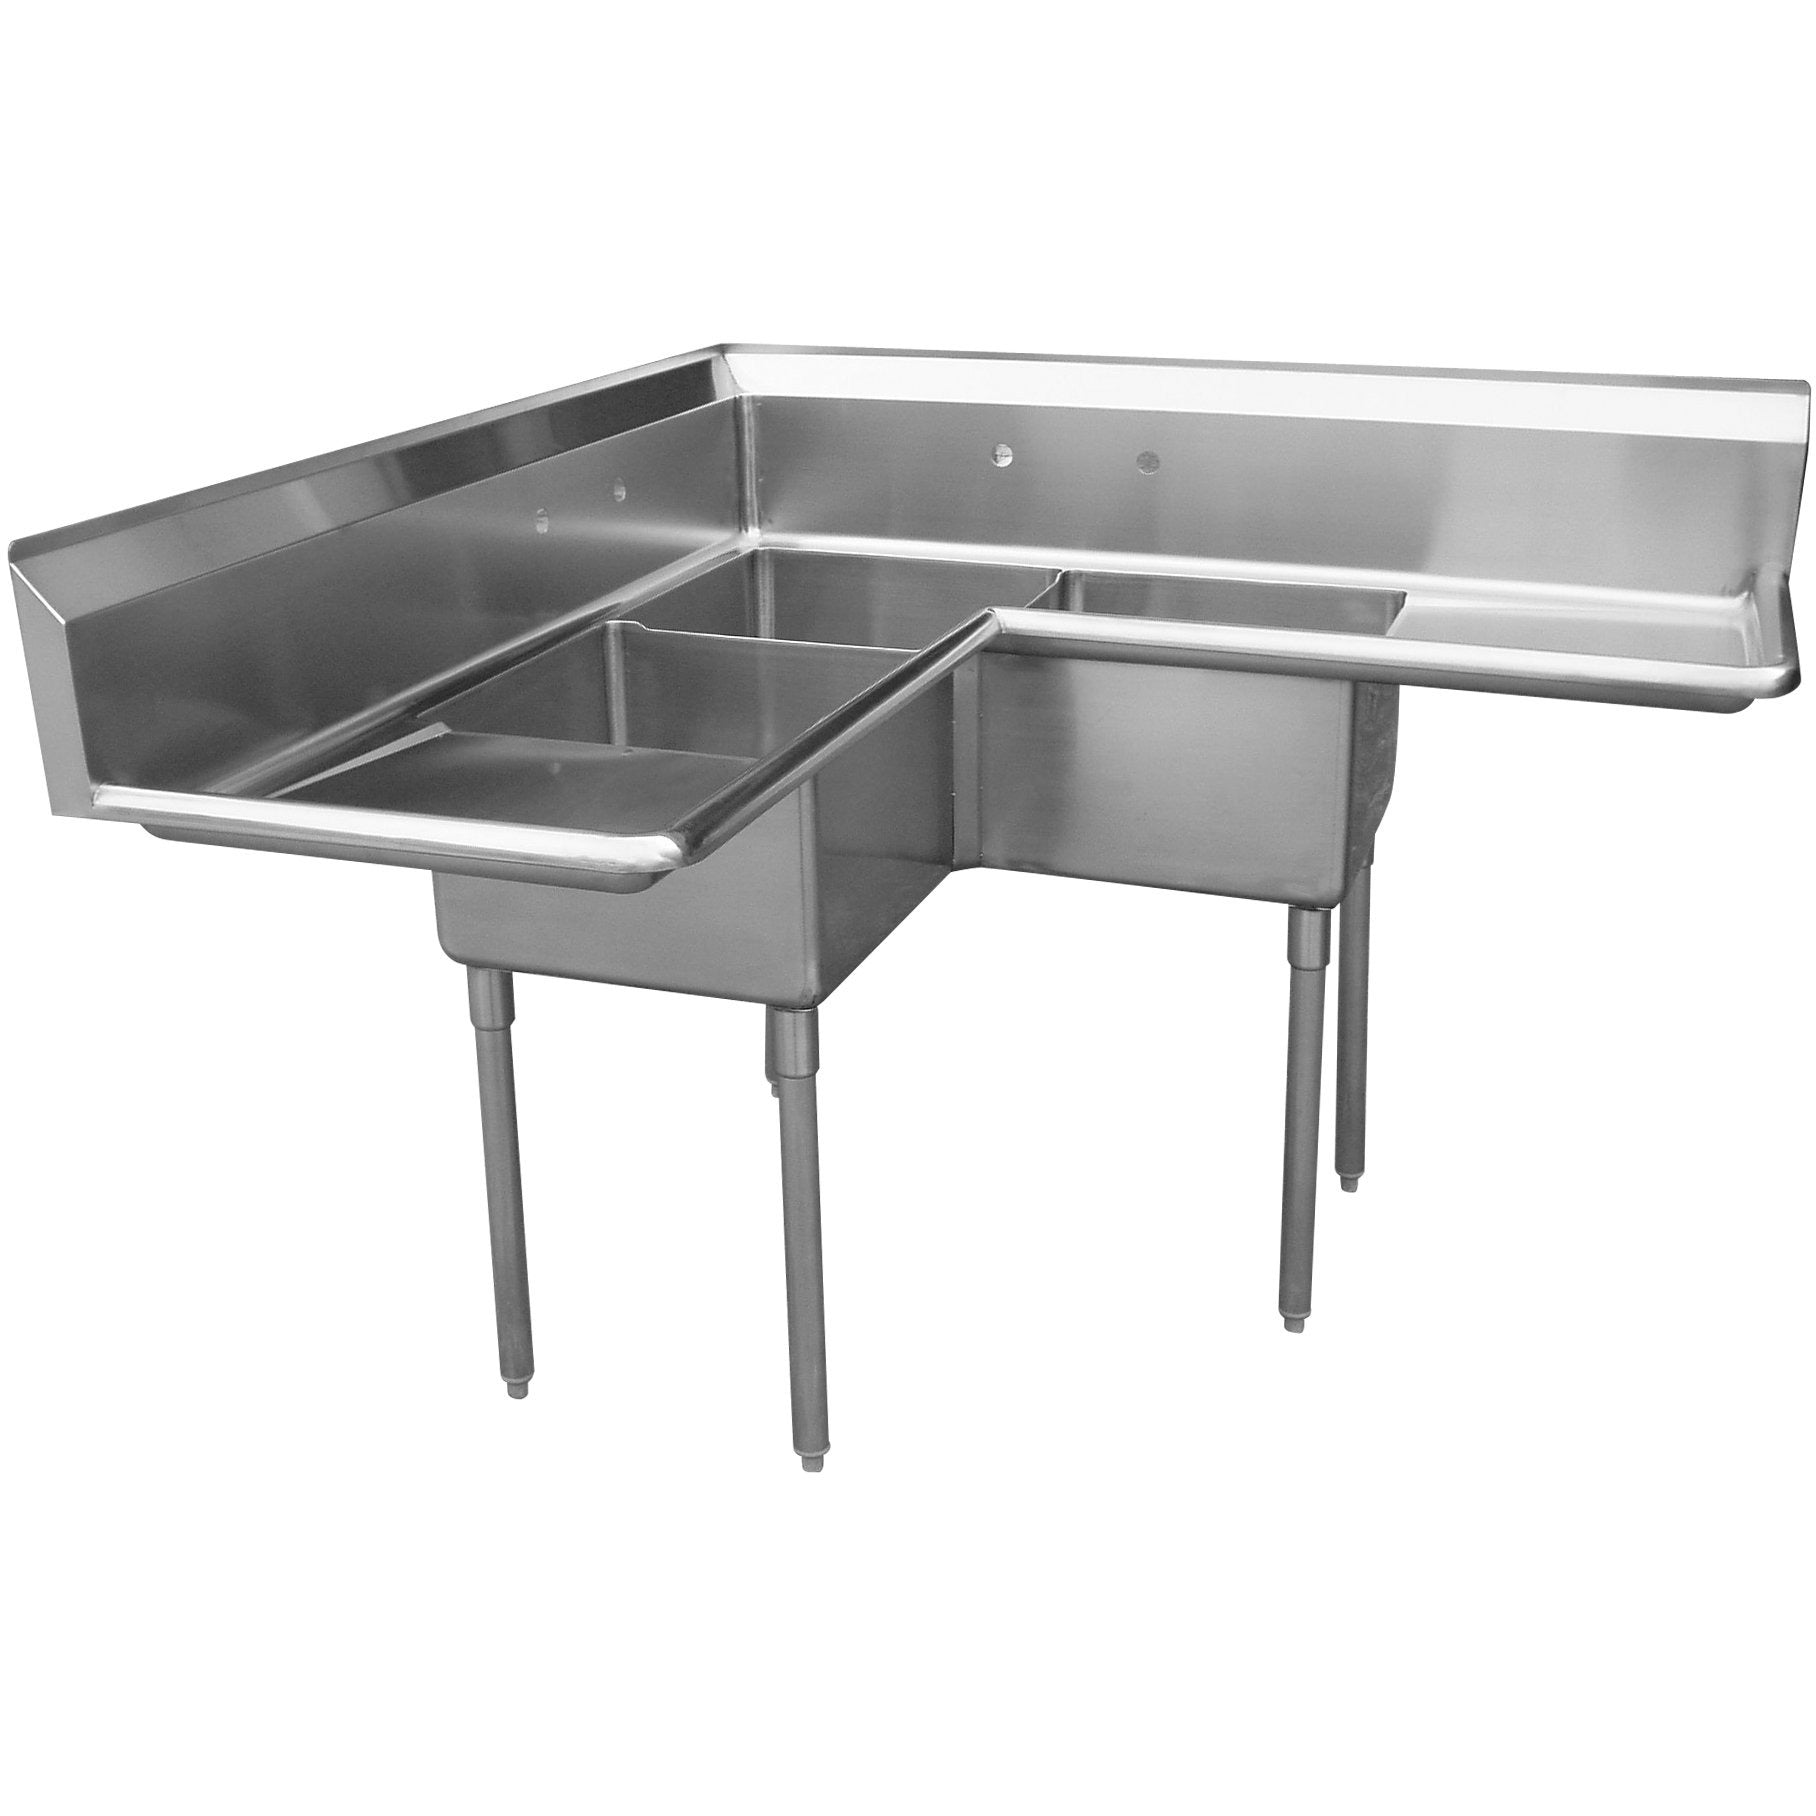 Stainless Steel 3 Compartment Sink 45 X 45 With 2 18 Drainboards